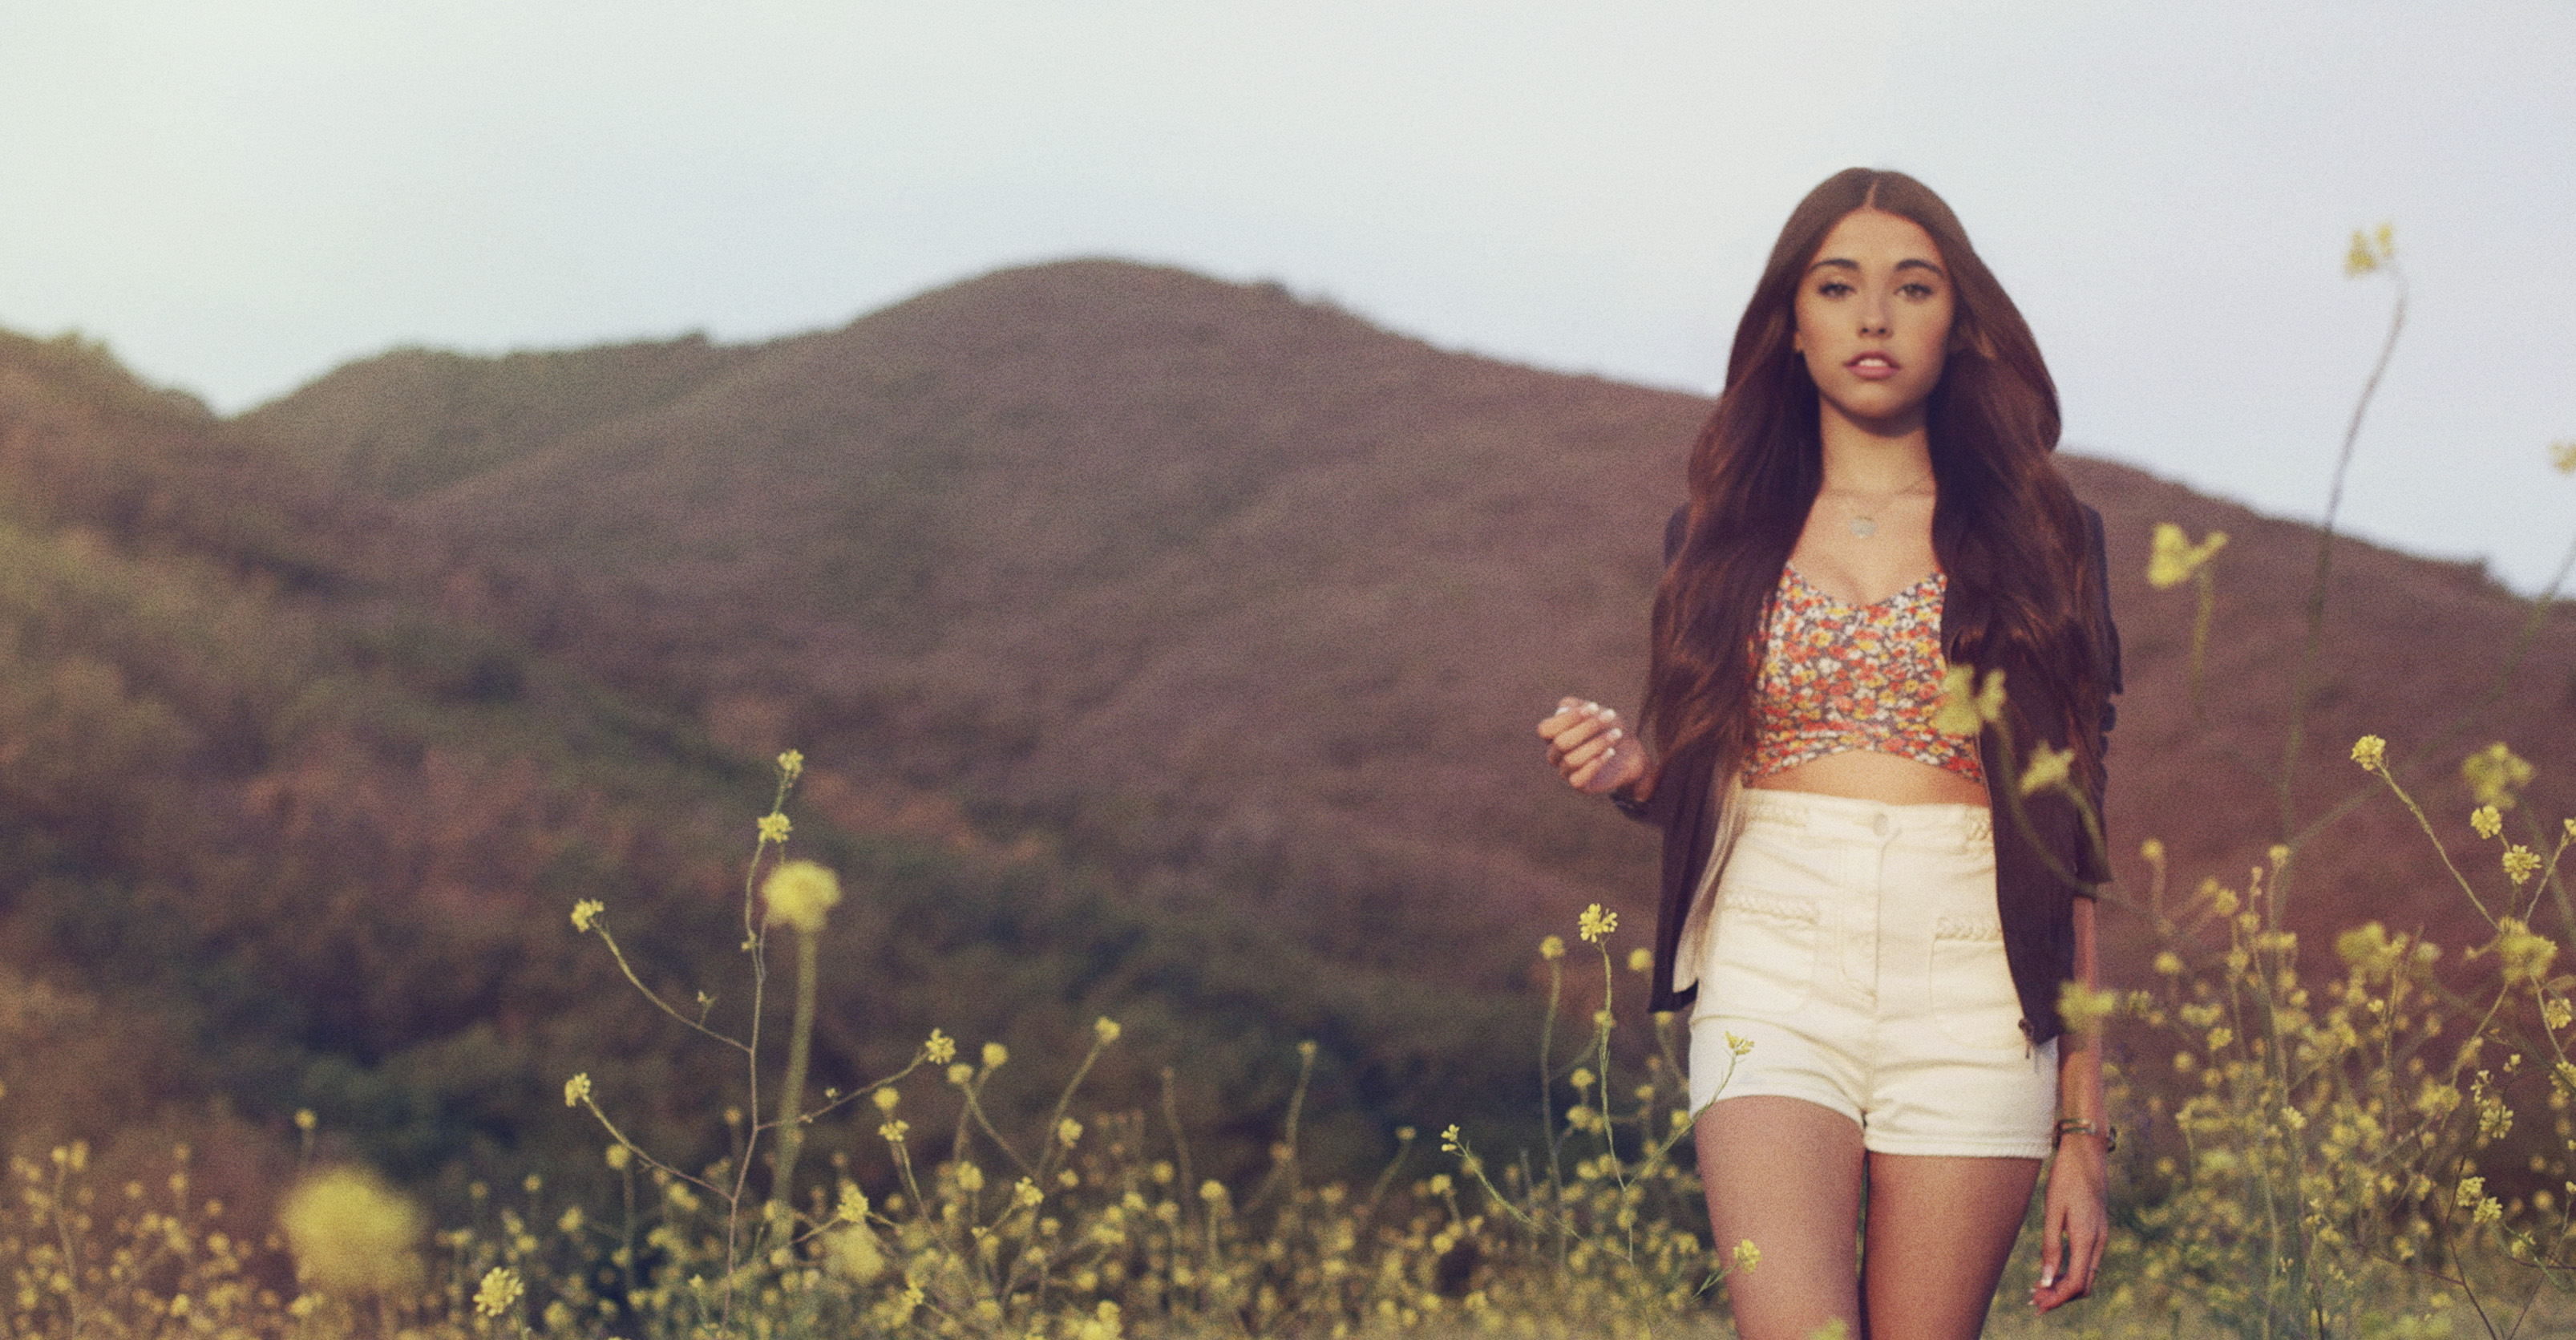 madison beer wallpaper,people in nature,hair,photograph,yellow,beauty